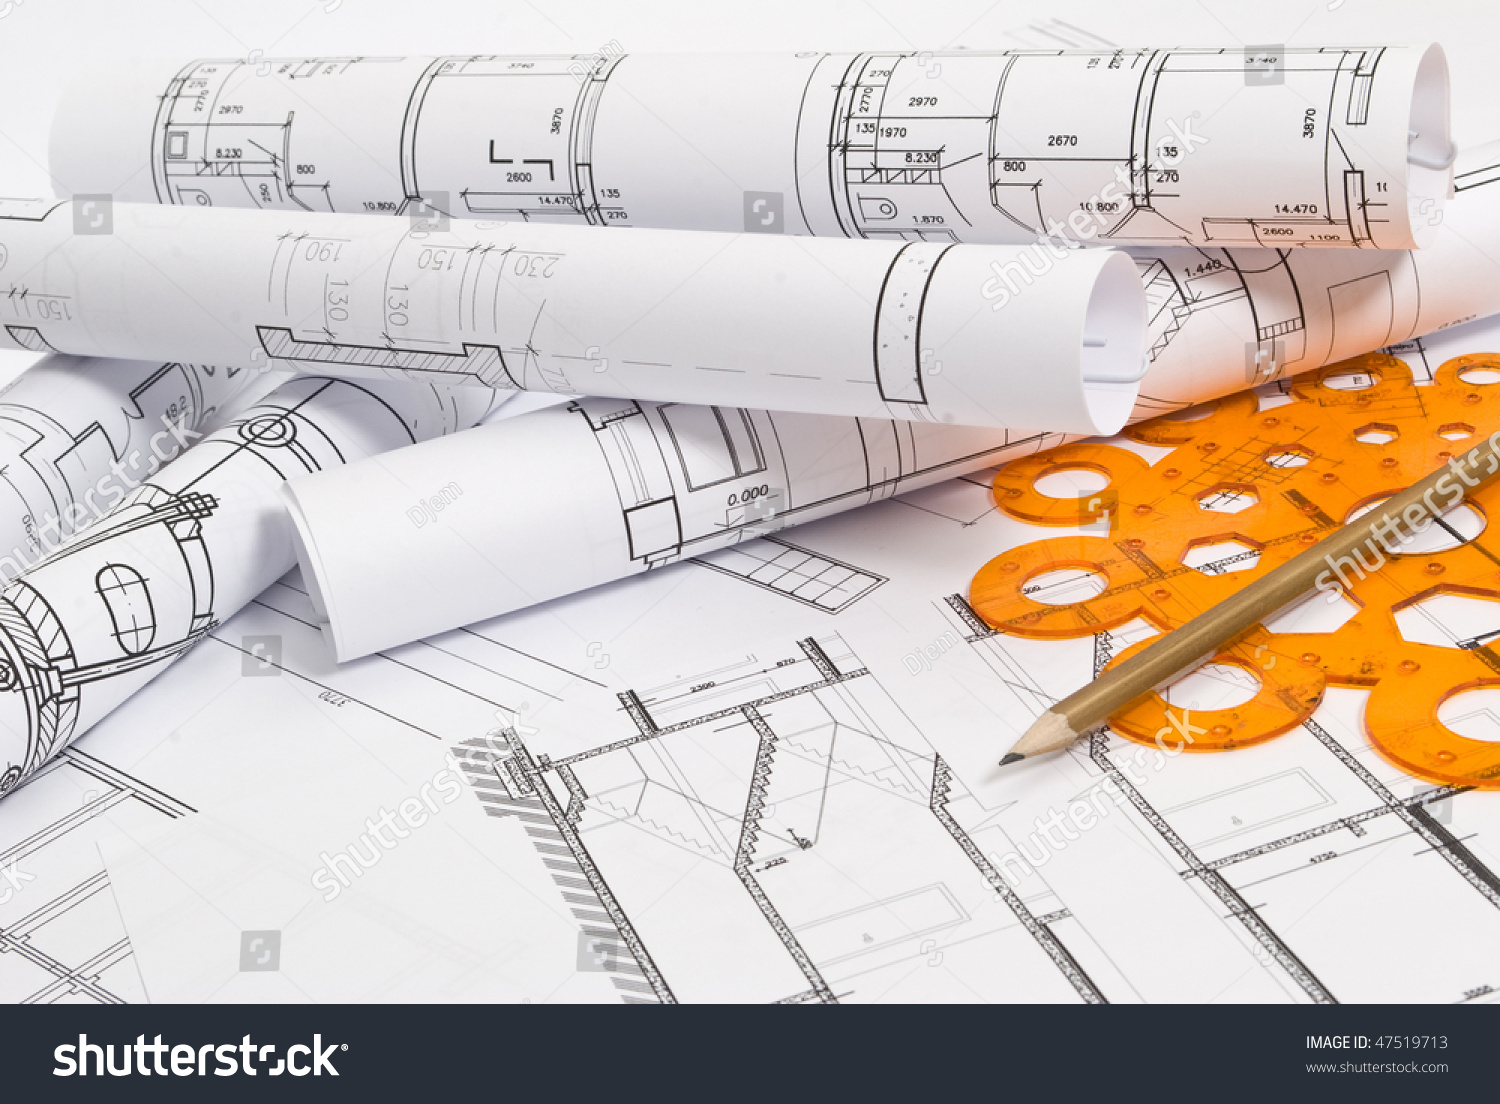 Drawings And Various Tools Stock Photo 47519713 Shutterstock